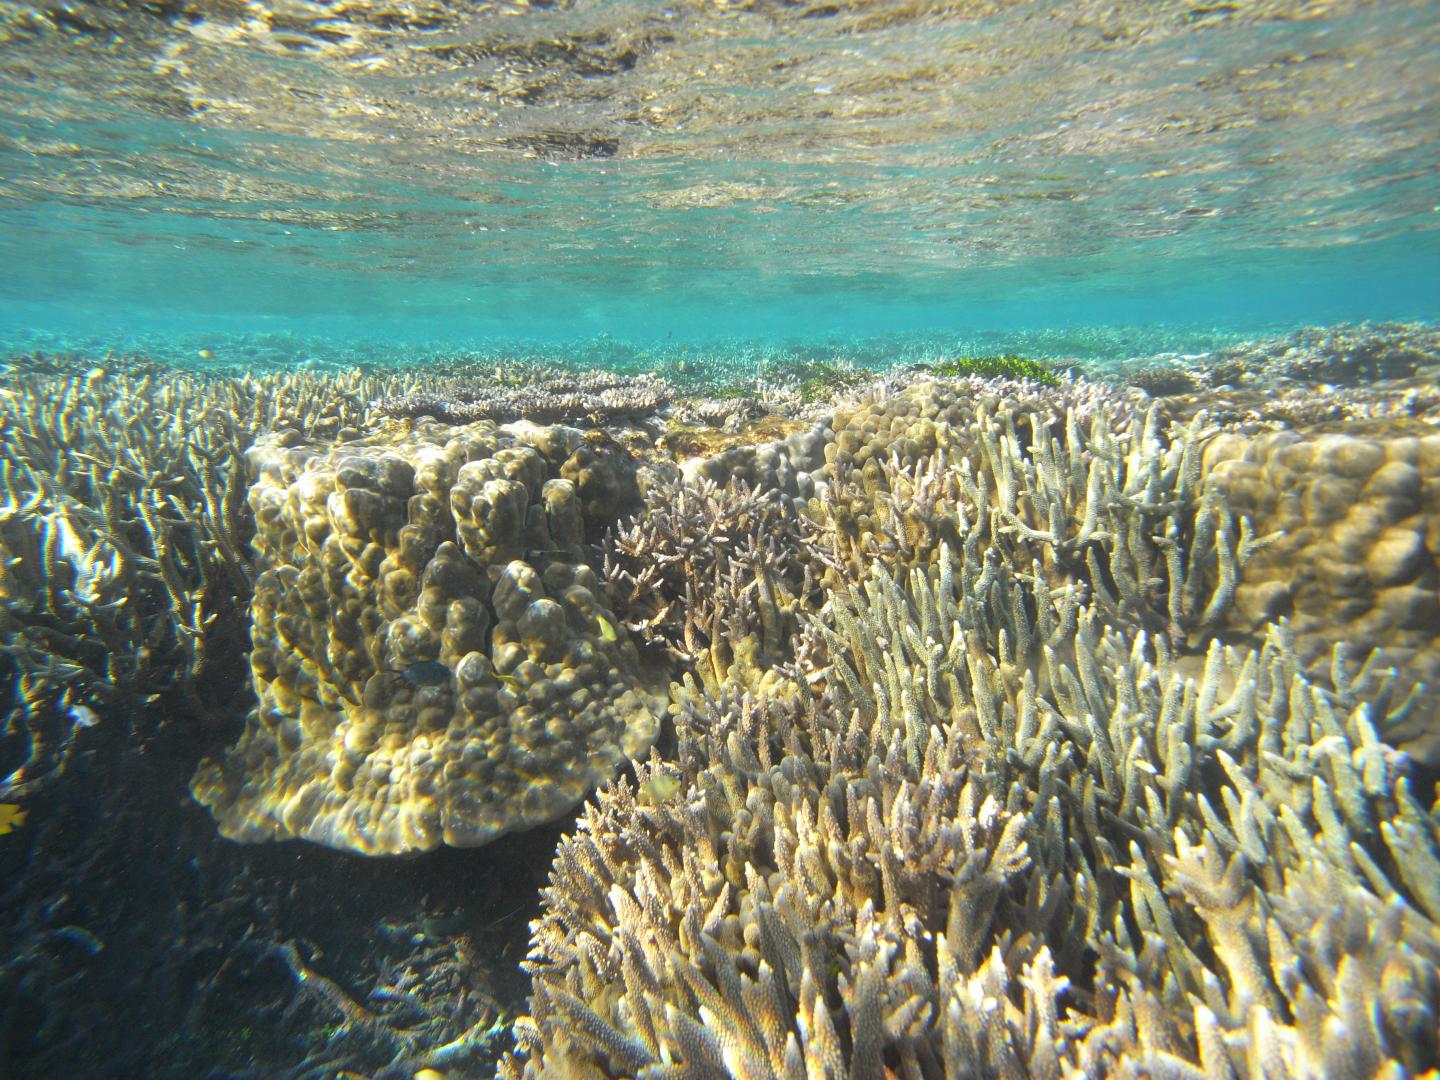 Great Barrier Reef coral in 2010